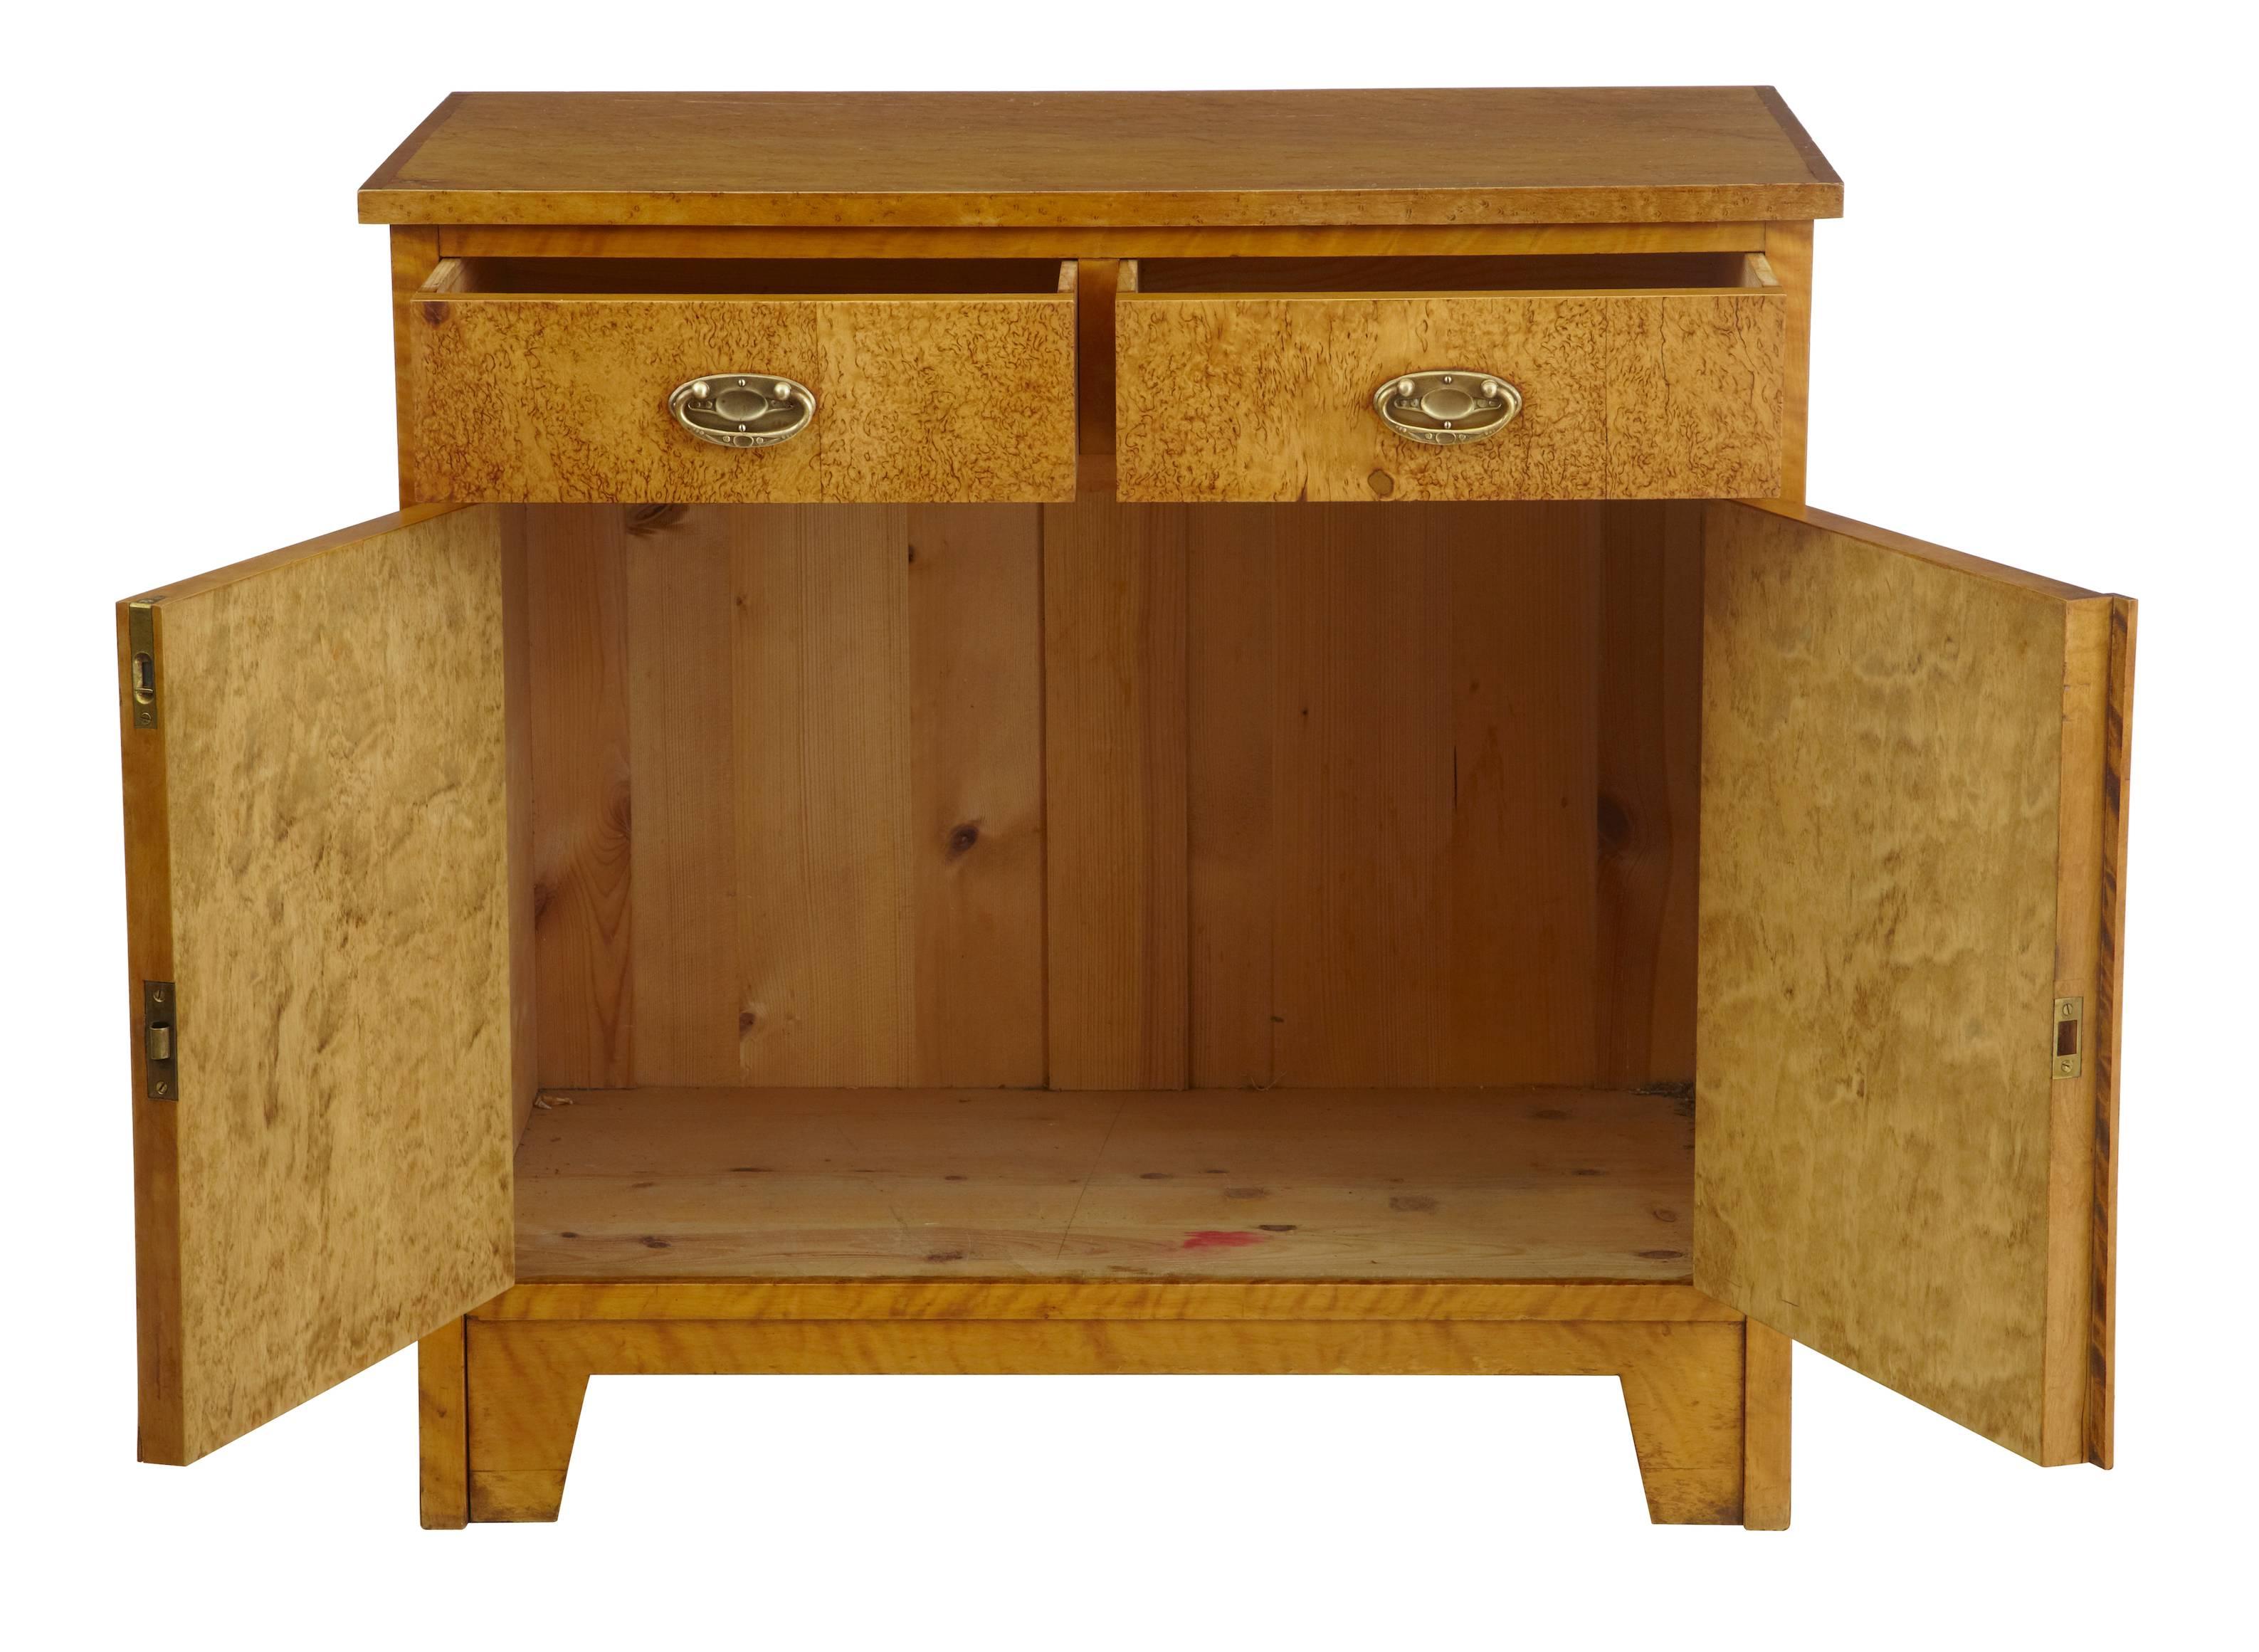 Good quality Swedish small cupboard with drawers, circa 1905.
Two drawers over double door cupboard.
Original handles.
Inlaid rose details to both door fronts.

Marks to top and one area of small fill.
Measures:
Height: 29 1/4